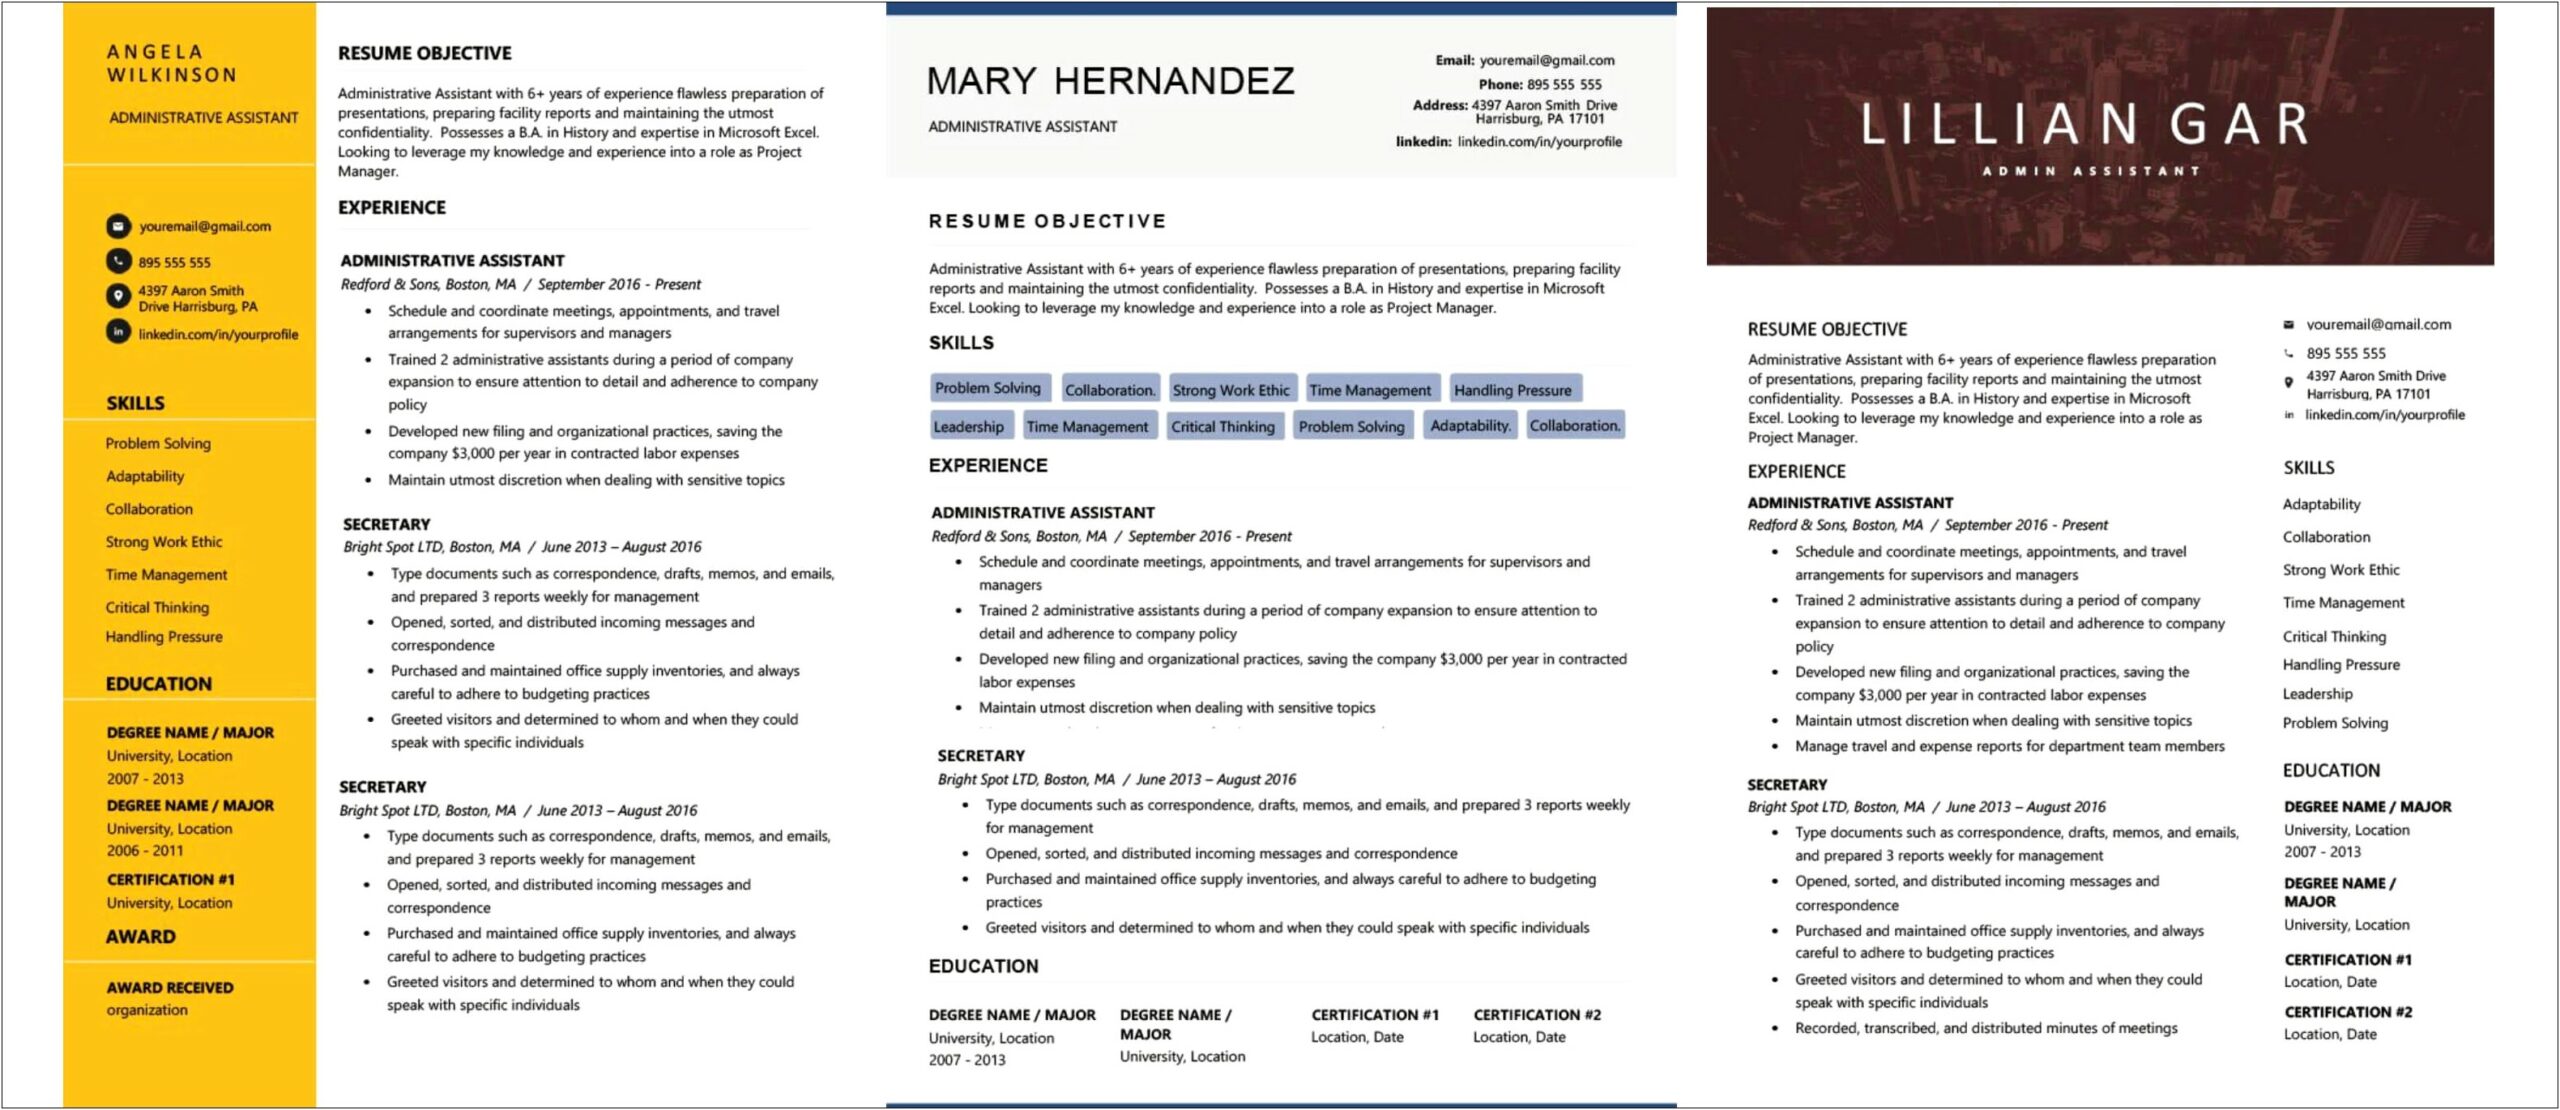 ﻿1 Job 2 Companies In A Resume